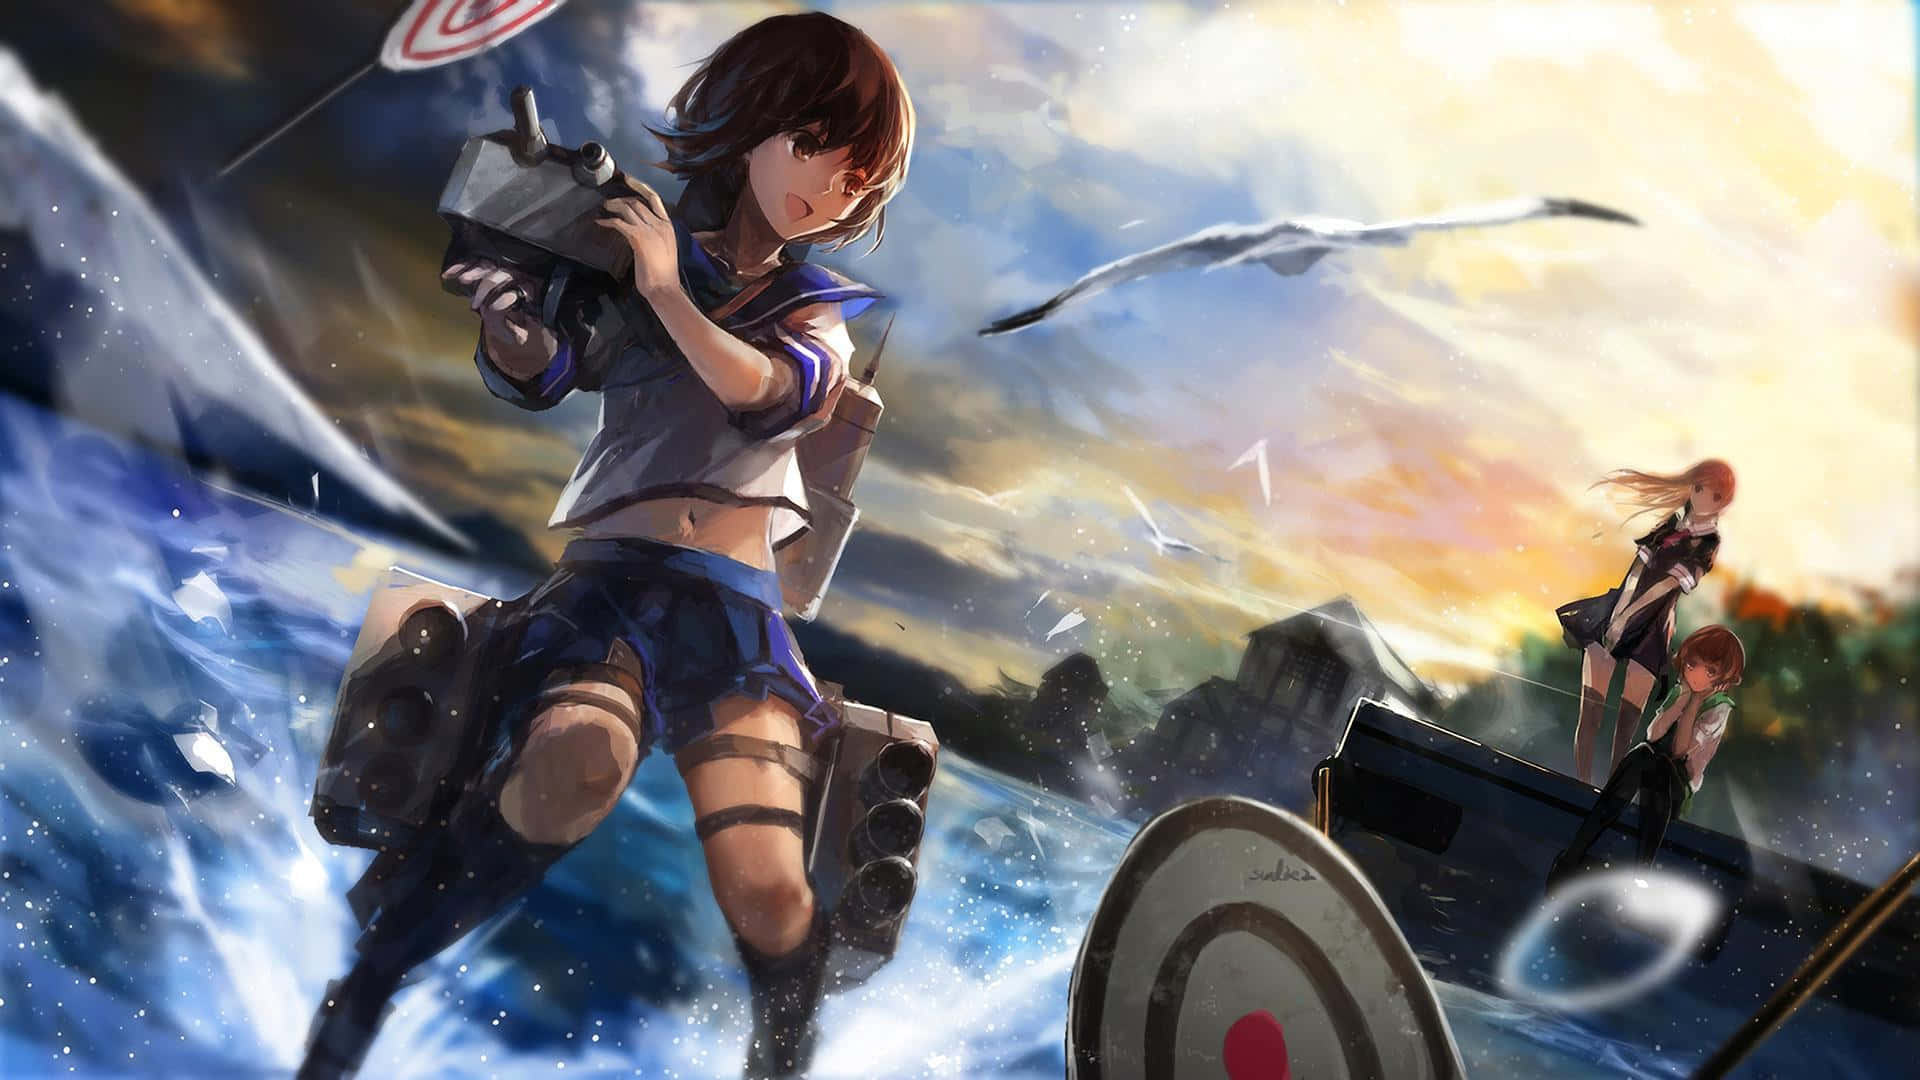 Let the mighty warships of Kantai Collection take you to a grand adventure! Wallpaper